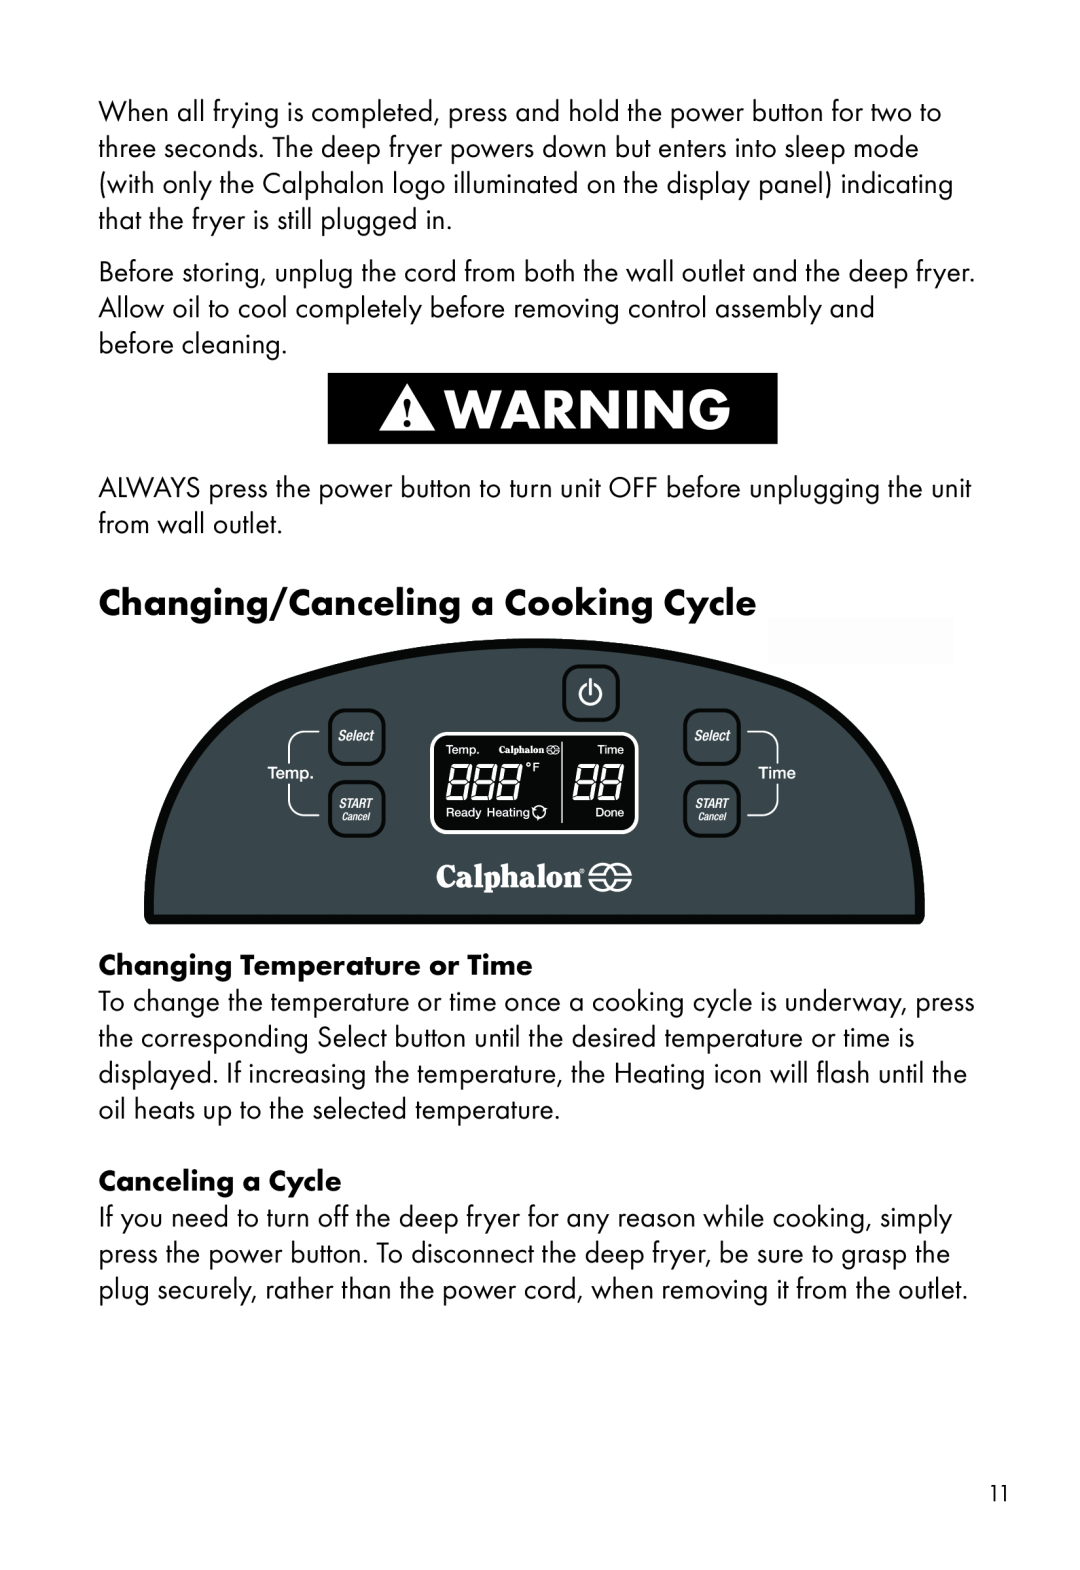 Calphalon HE380DF manual Changing/Canceling a Cooking Cycle, Changing Temperature or Time, Canceling a Cycle 